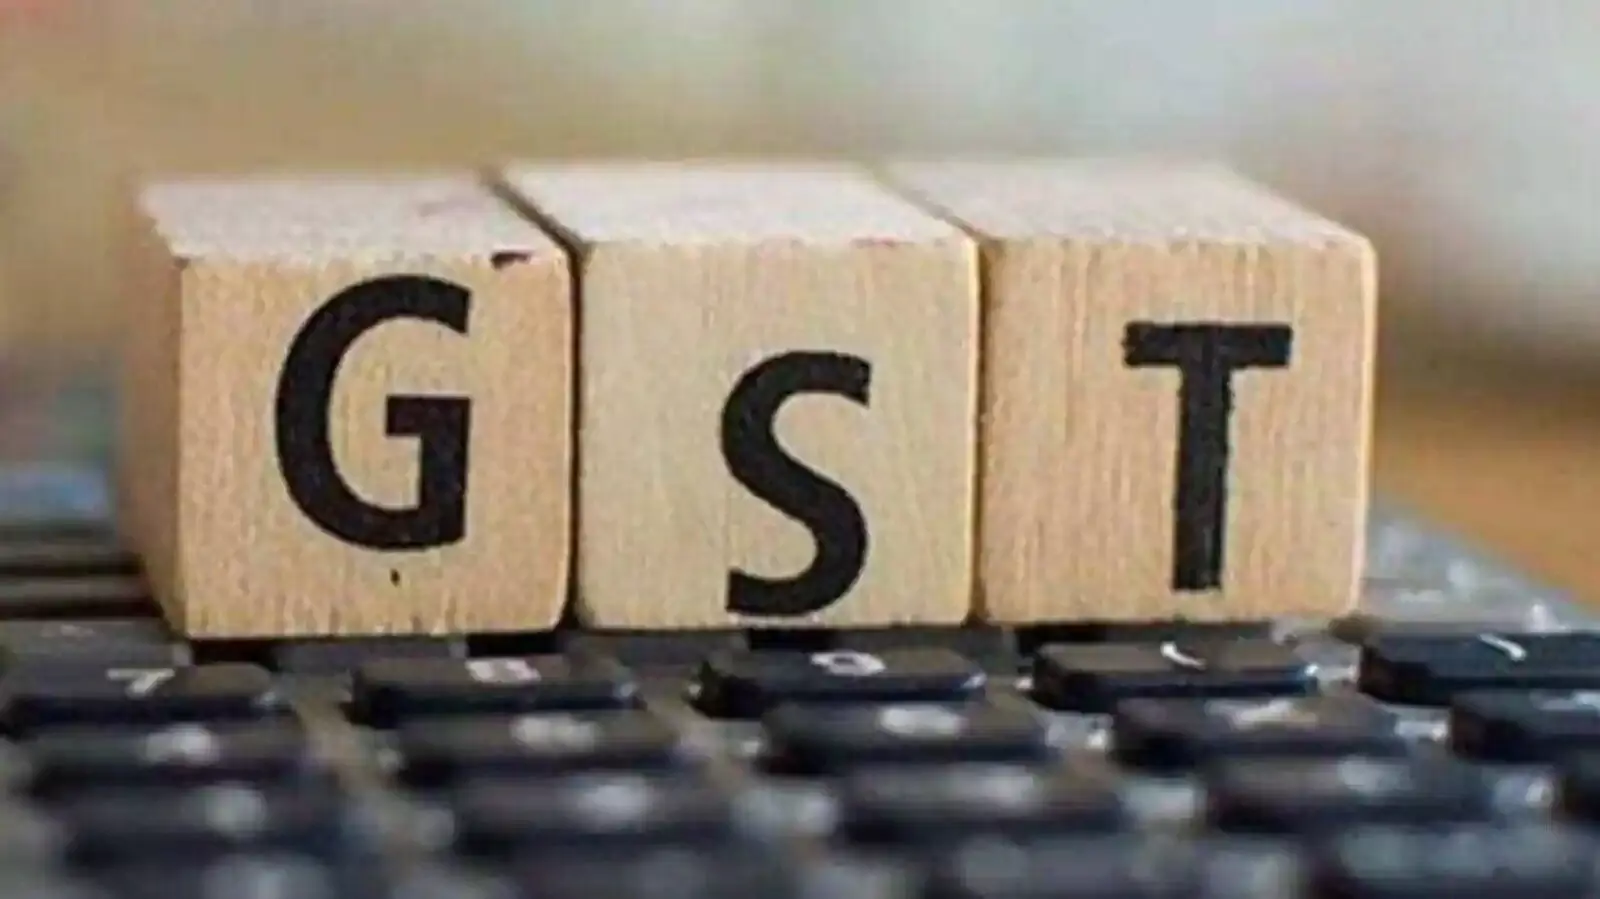 Today on the occasion of GST Day, Government to honour tax payers